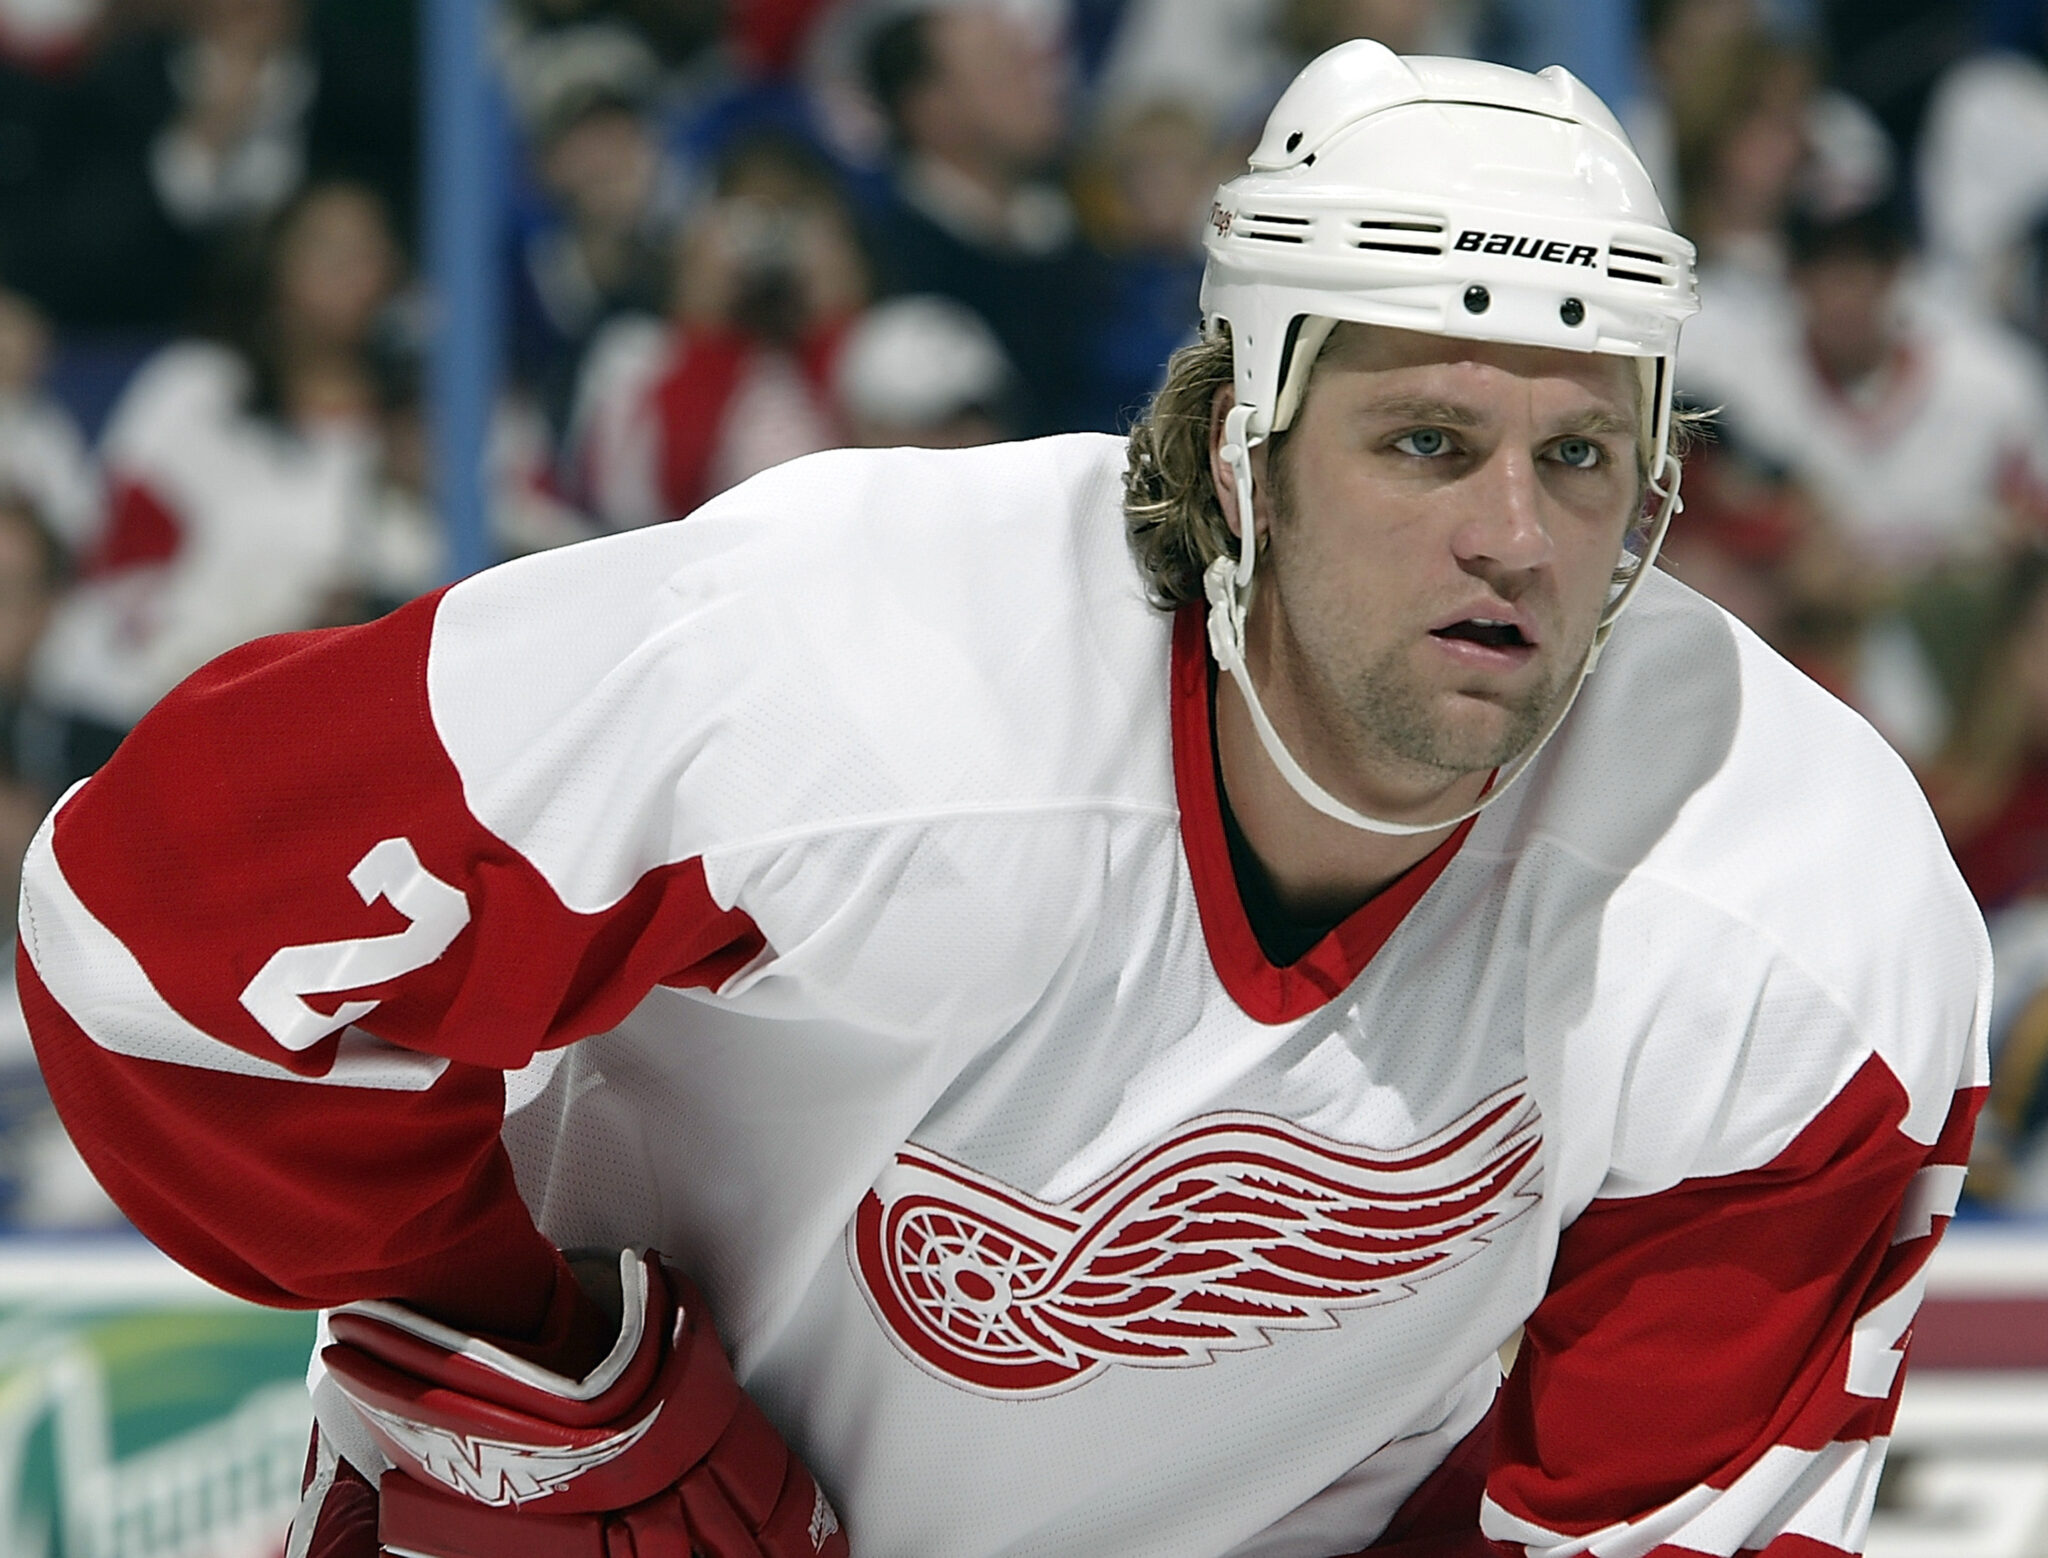 Greatest Uniforms in Sports, No. 7: Detroit Red Wings